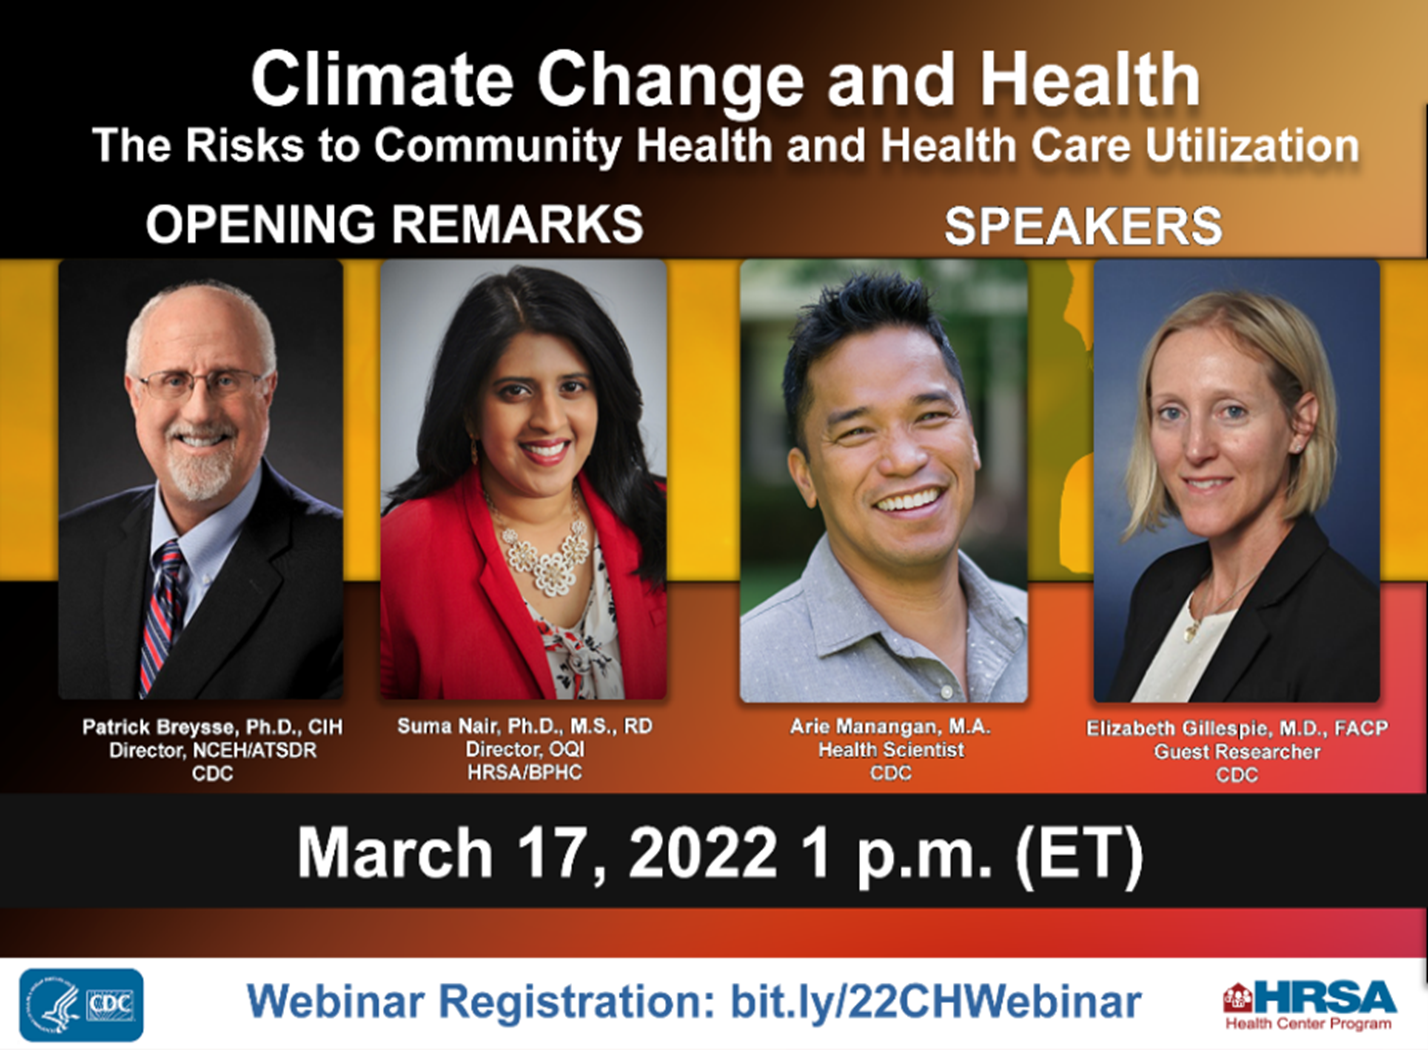 March 17, 2022 - Climate Change and Health: The Risks to Community Health and Health Care Utilization